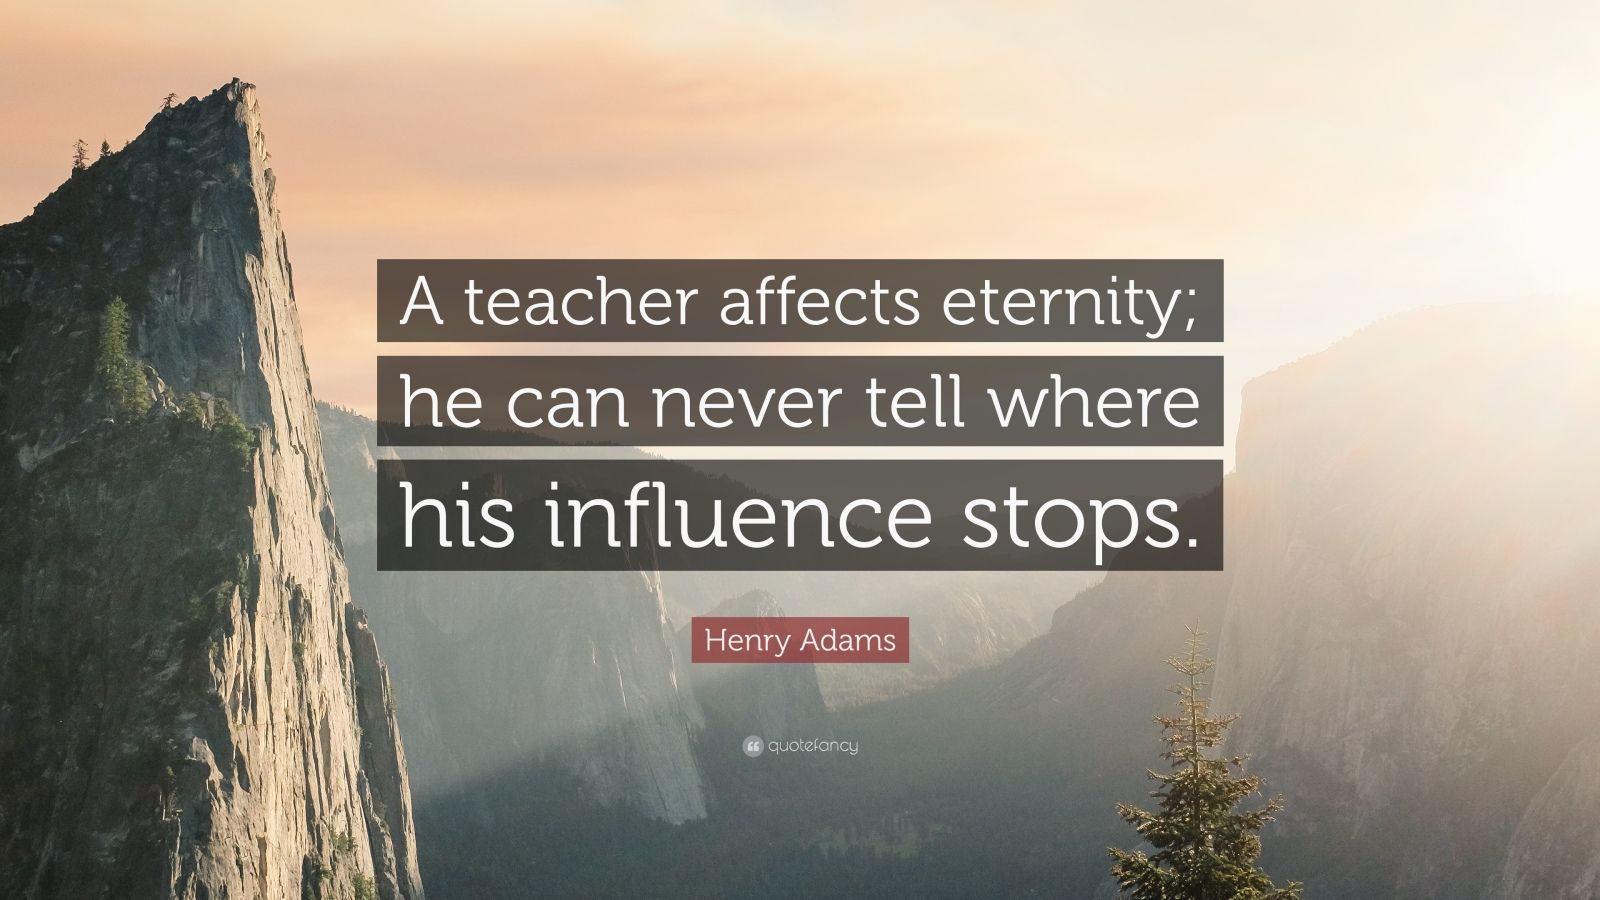 henry-adams-quote-a-teacher-affects-eternity-he-can-never-tell-where-his-influence-stops